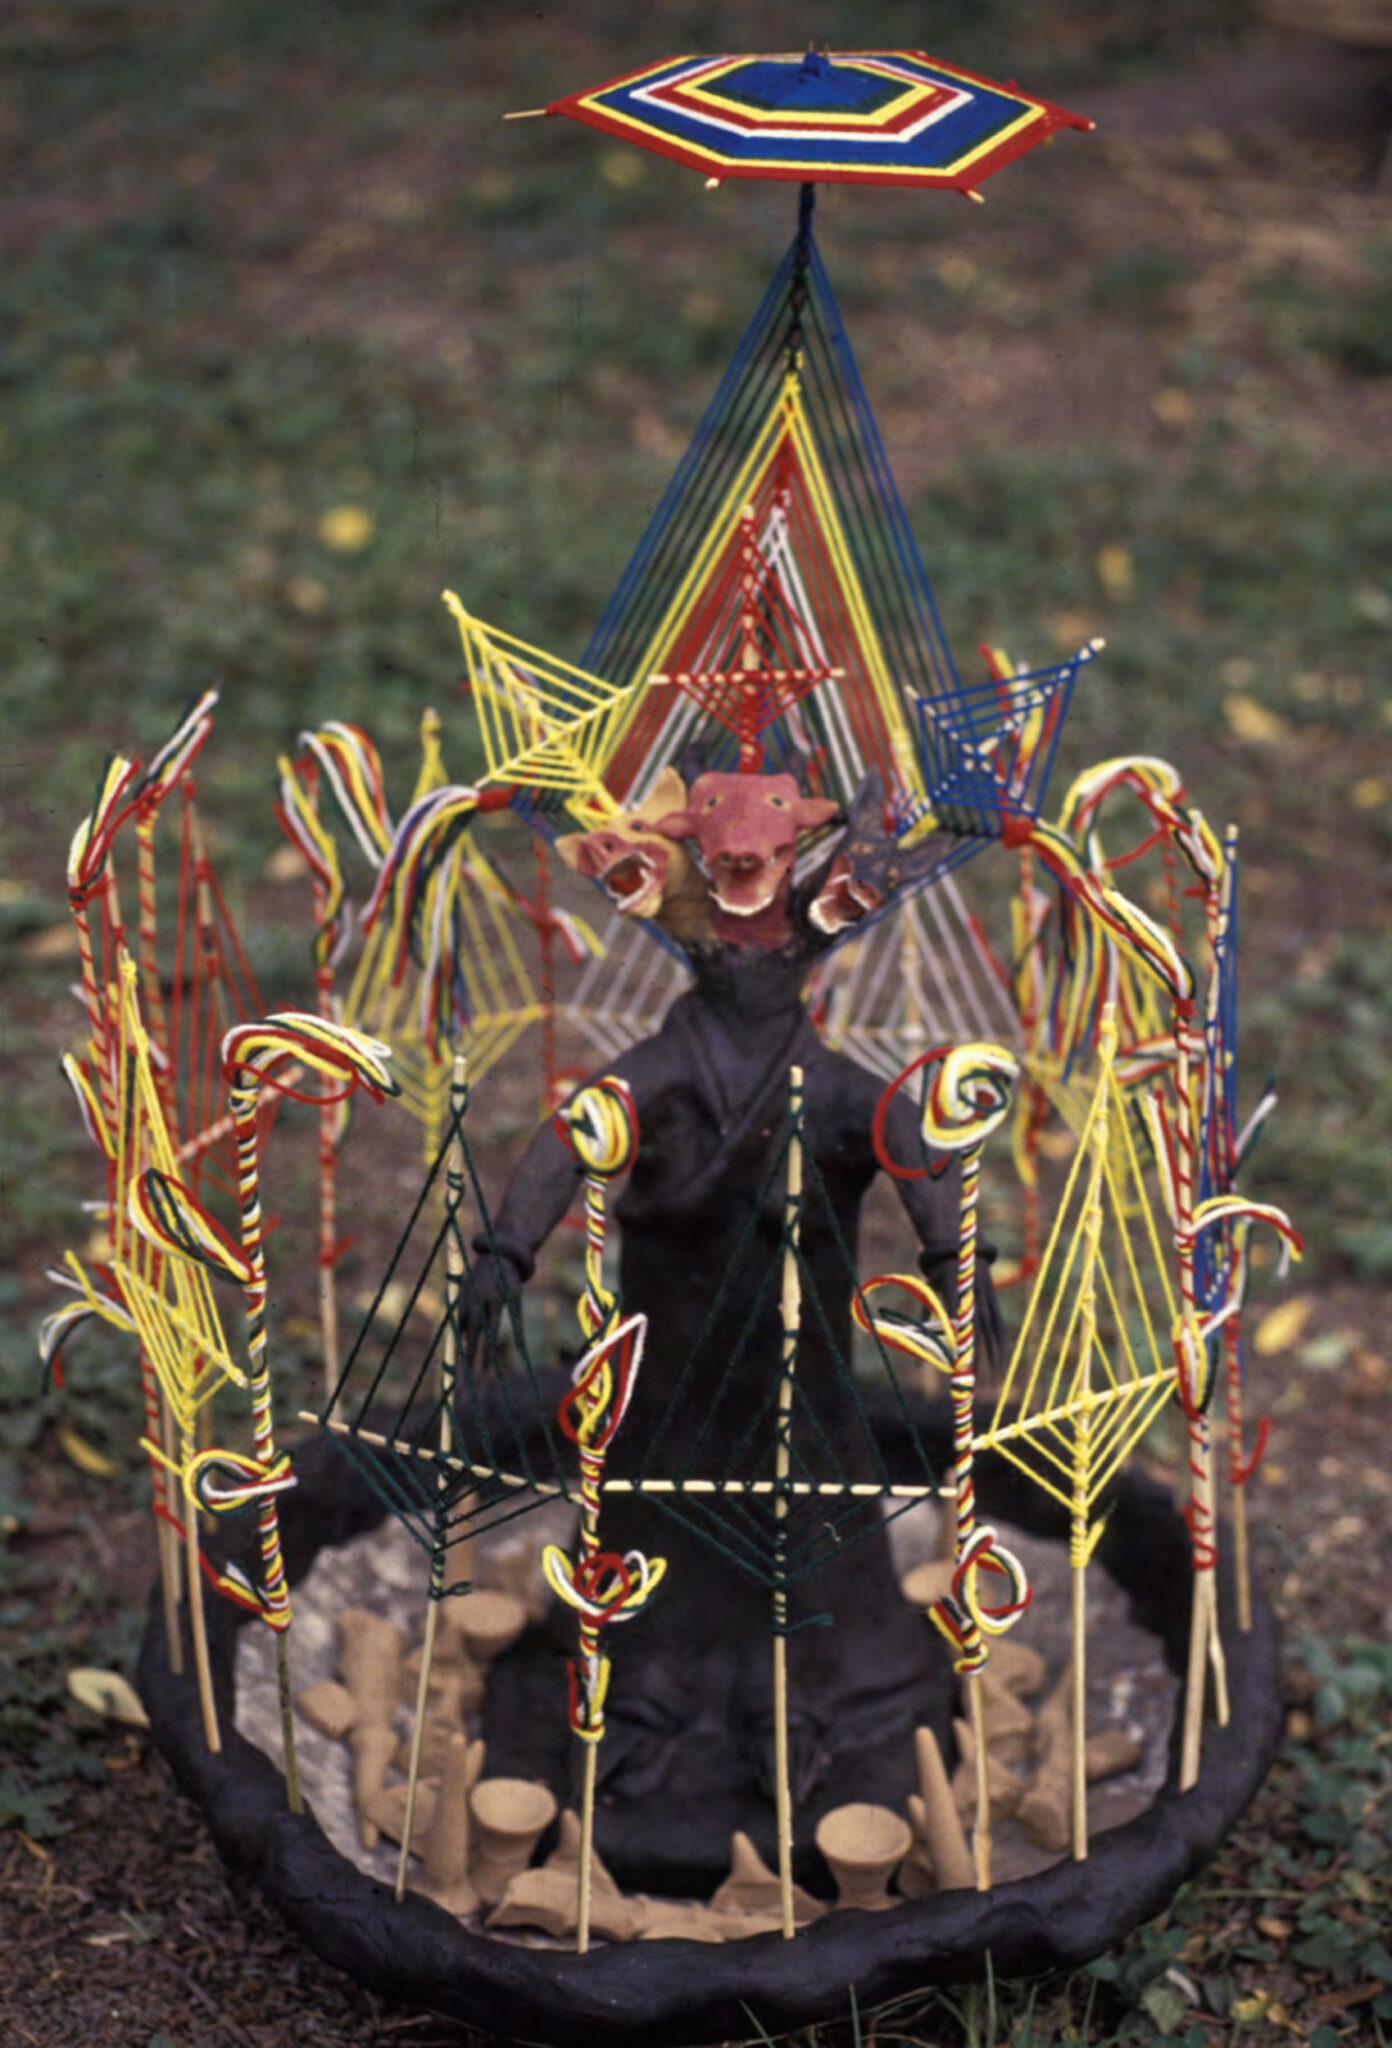 Effigy of three-headed figure surrounded and ornamented by woven lozenges in red, yellow, and blue